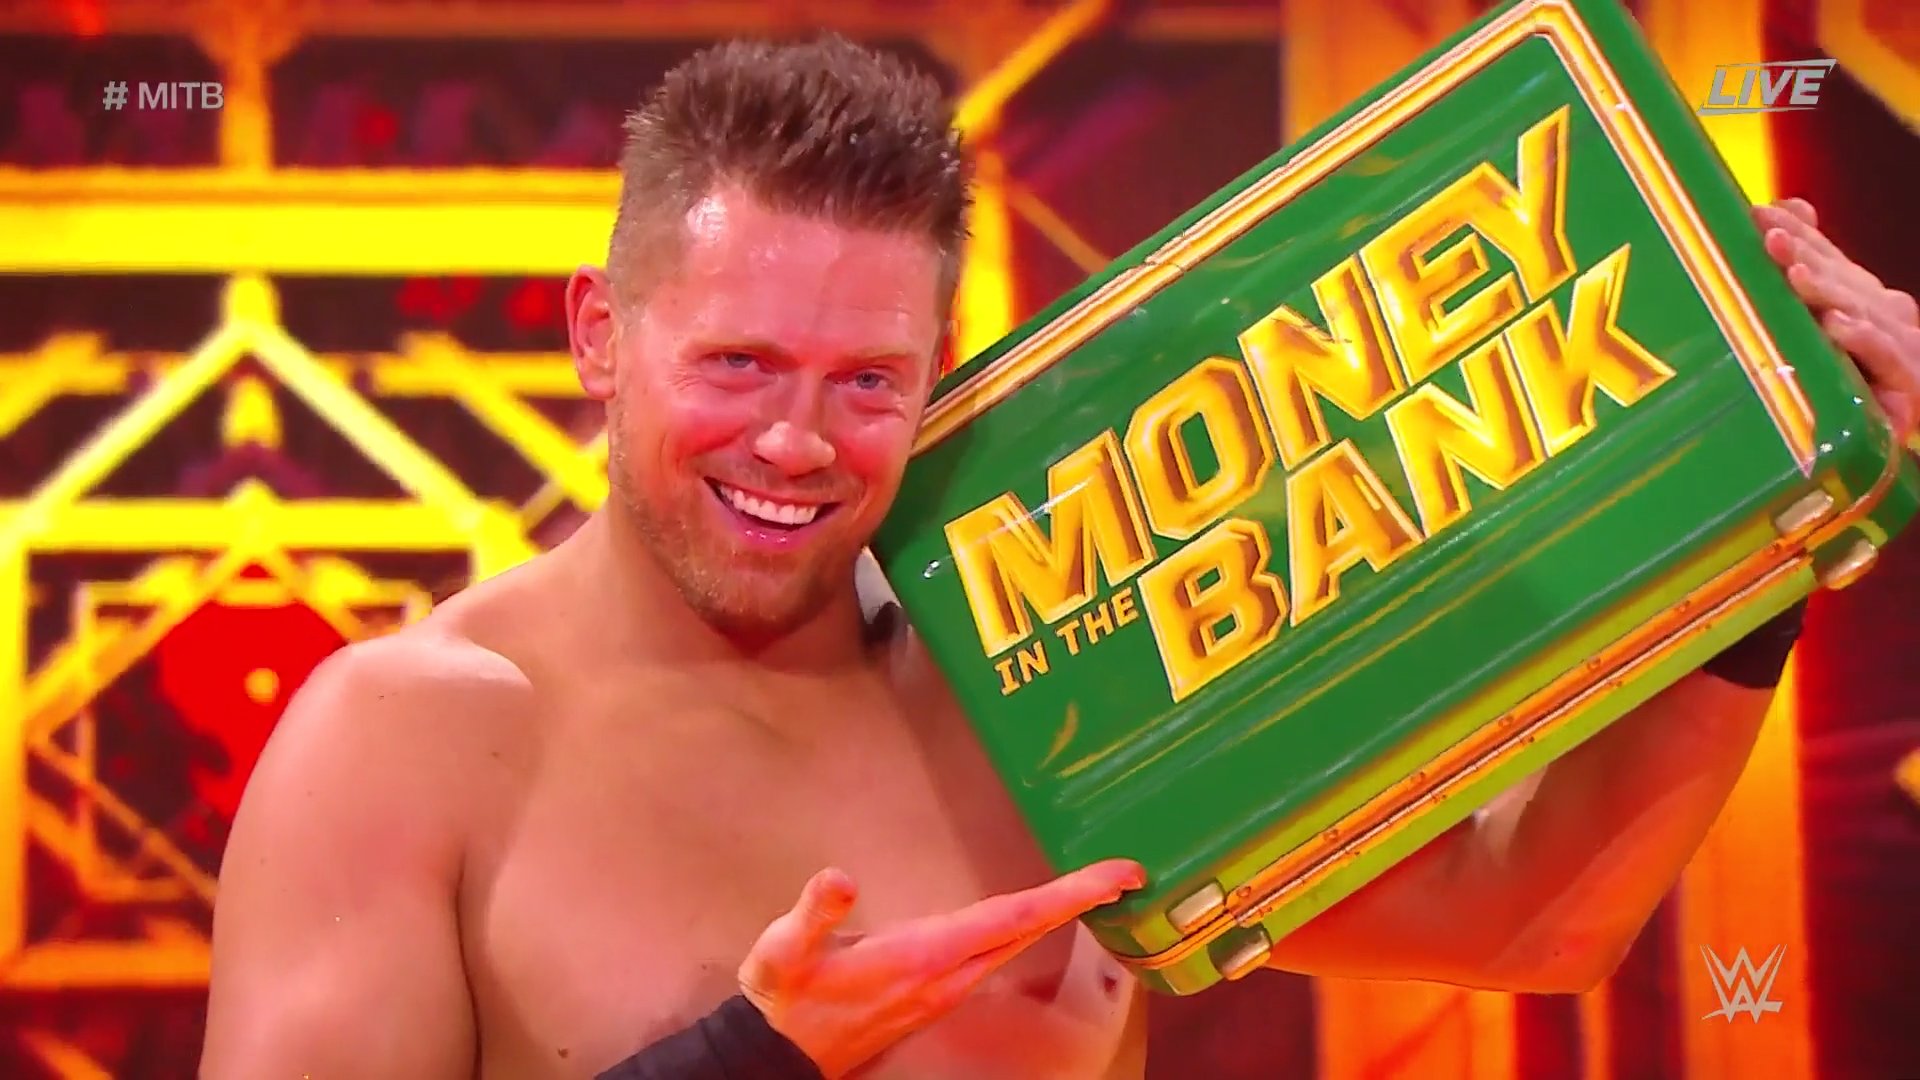 The Miz Wins the WWE Money In the Bank Briefcase, Heel Turn During the Match